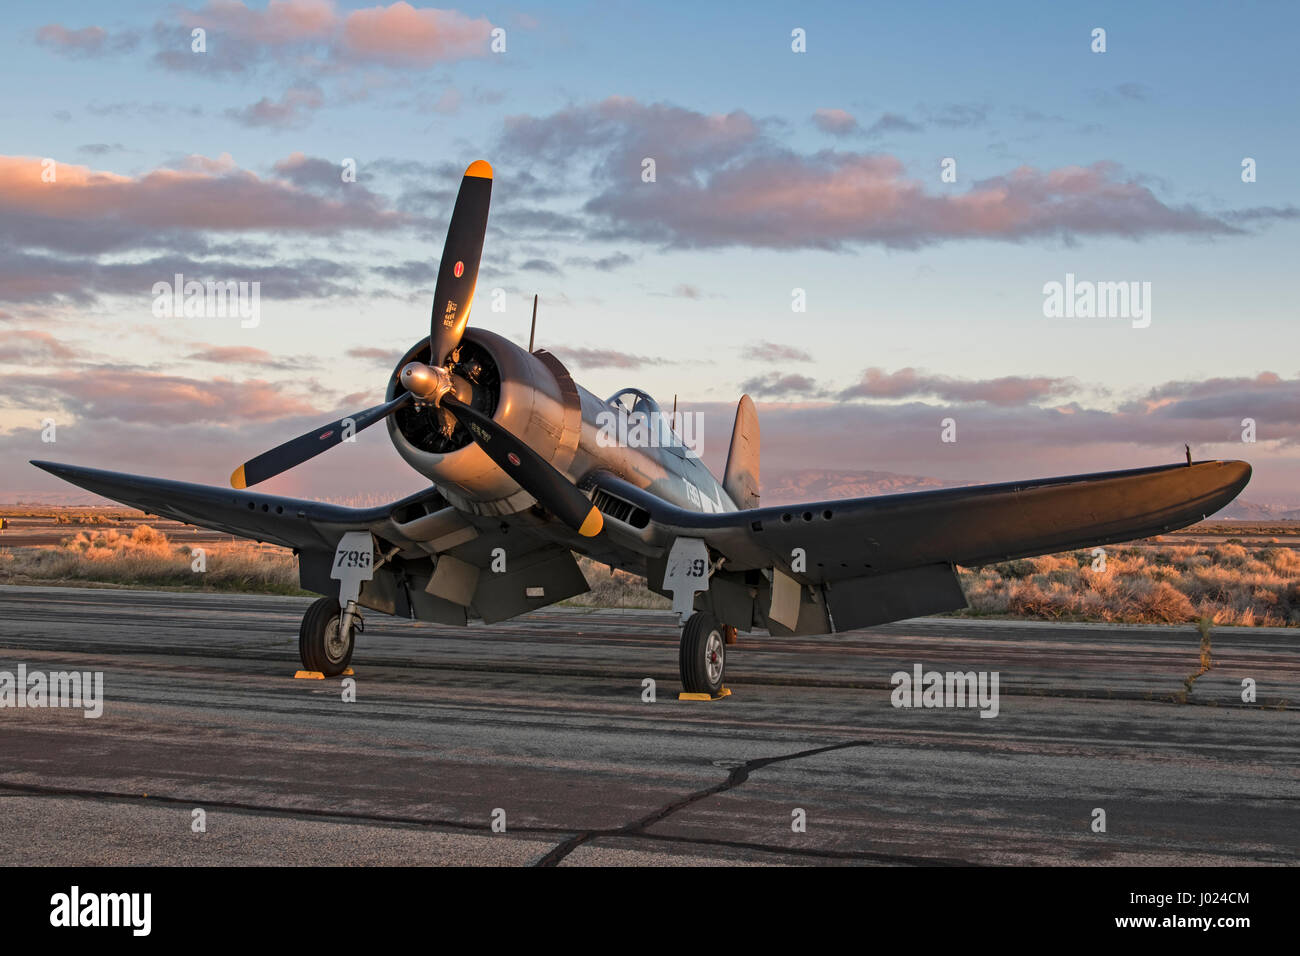 Airplane WWII F-4U Corsair vintage fighter aircraft at air show runway Stock Photo